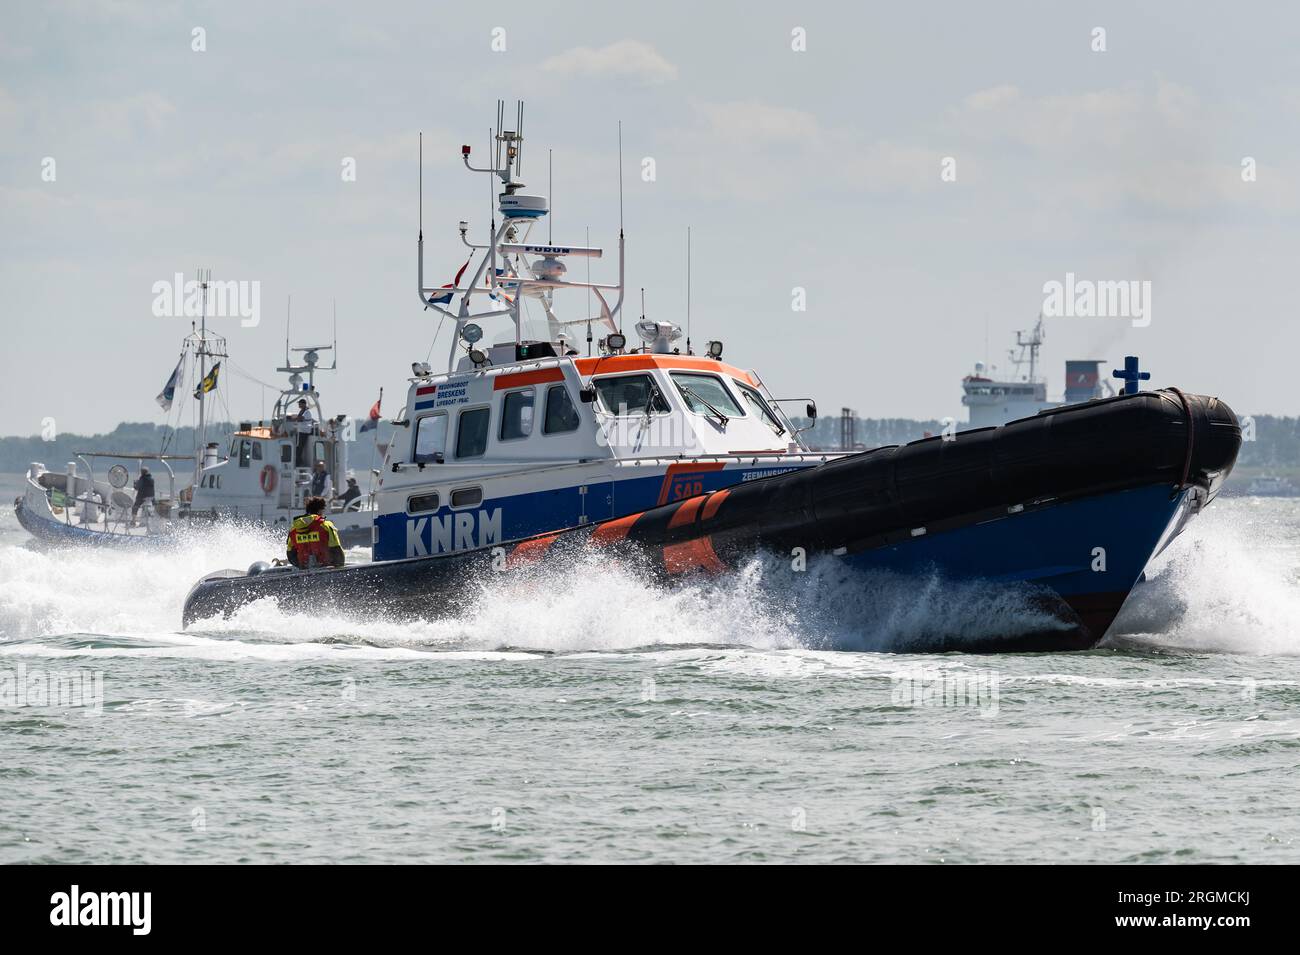 A rescue boat of the Royal Netherlands Sea Rescue Institution (KNRM) at the North Sea near Vlissingen. Stock Photo